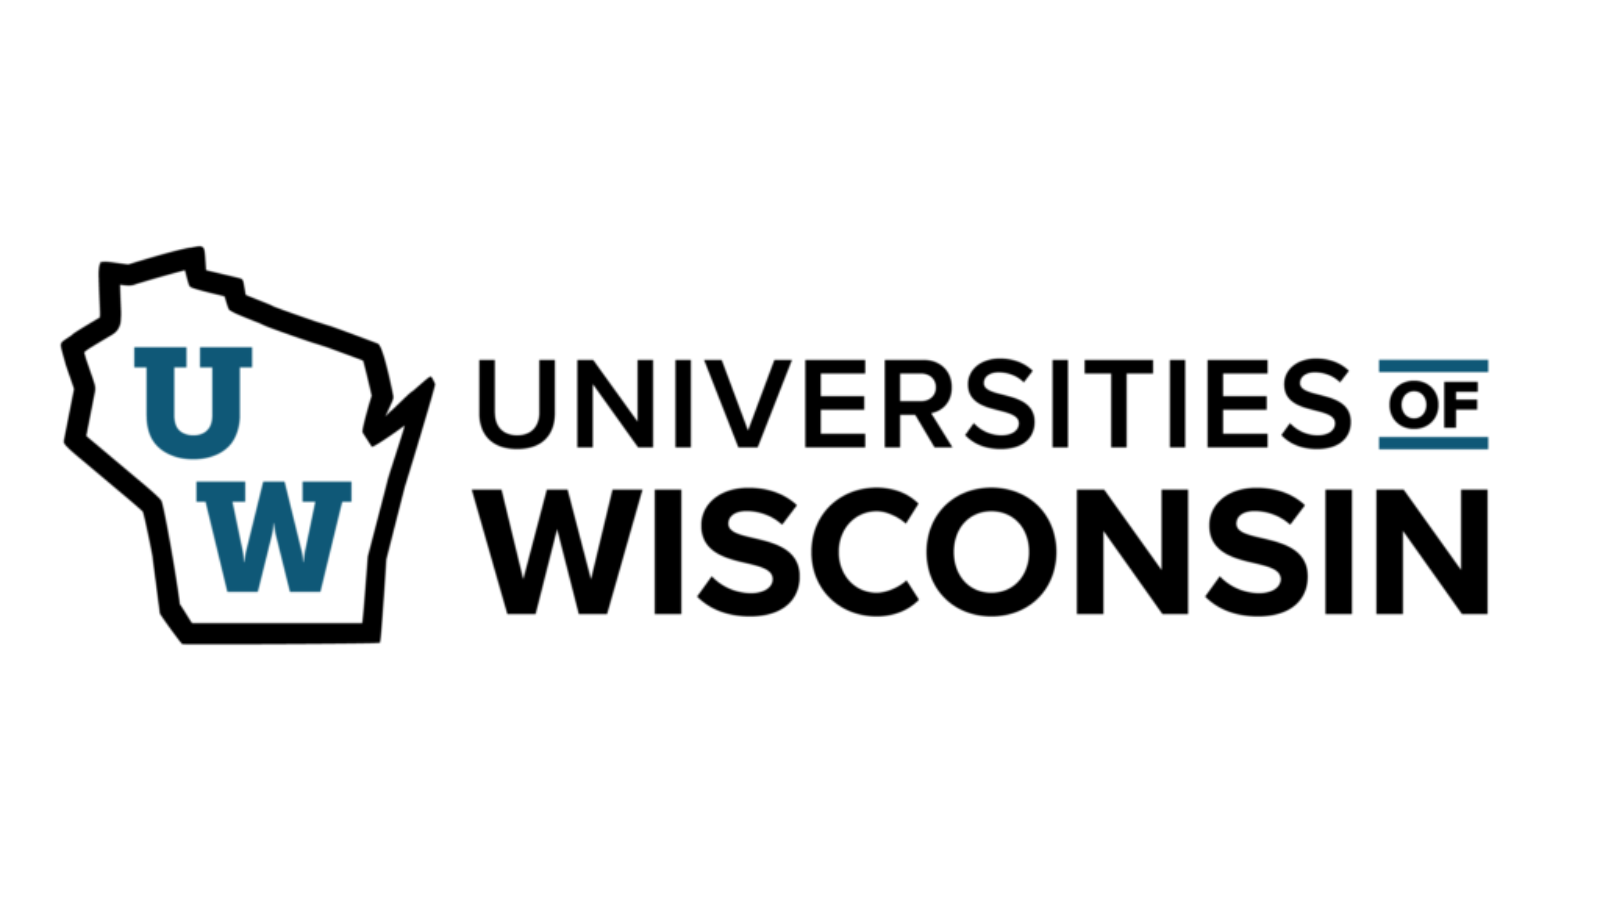 New Universities of Wisconsin identity is one of several changes underway